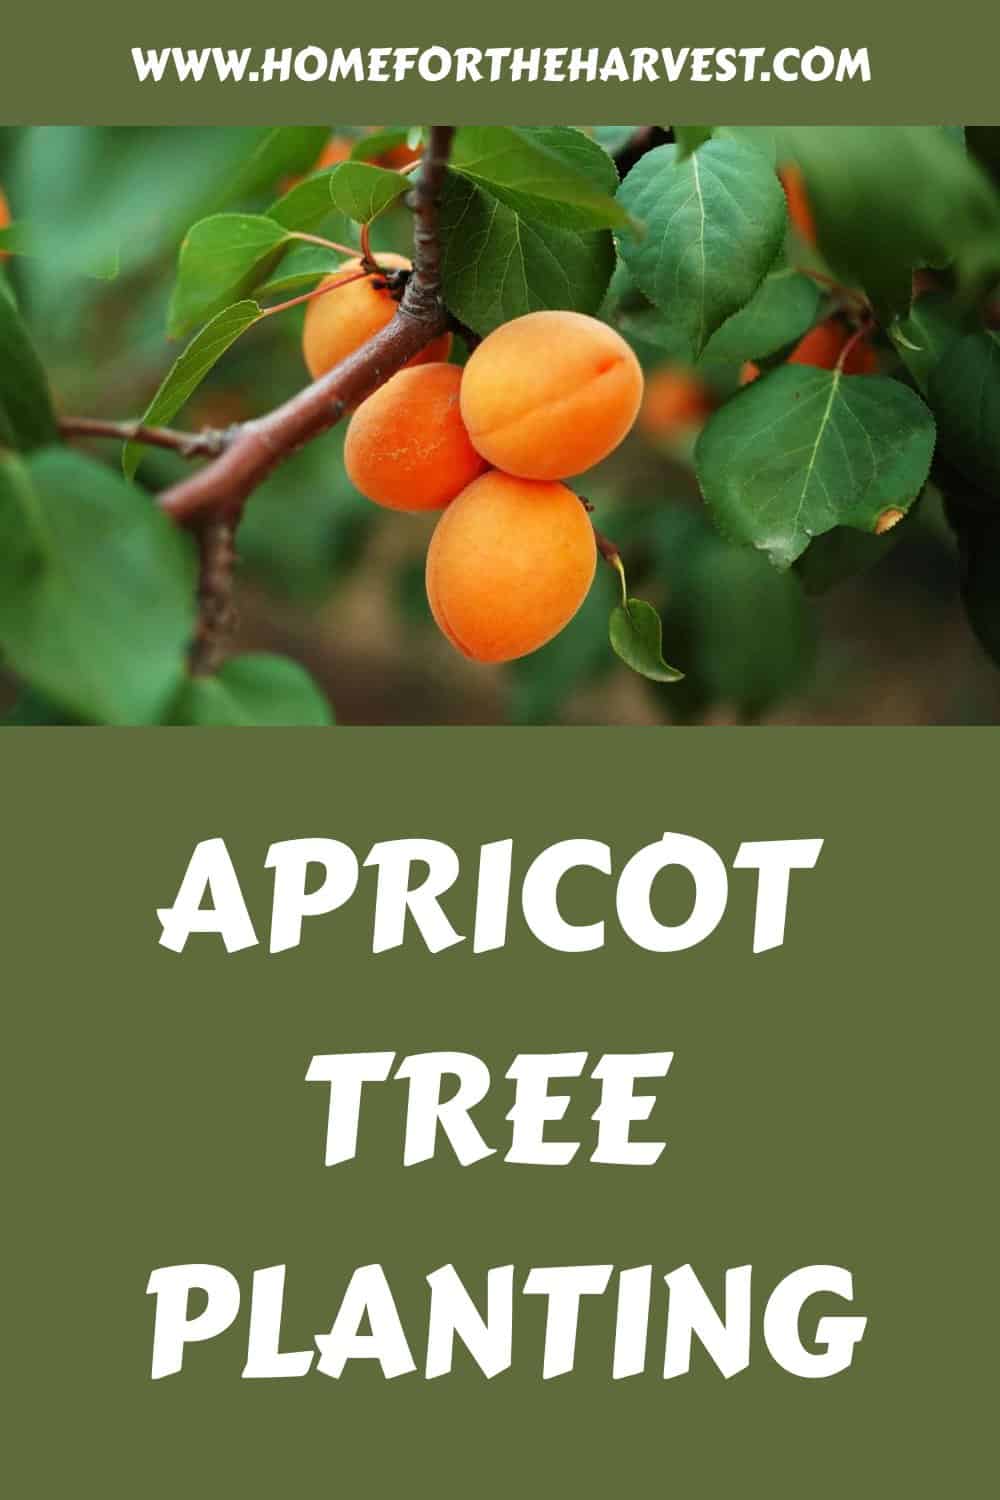 Apricot tree planting generated pin 44309